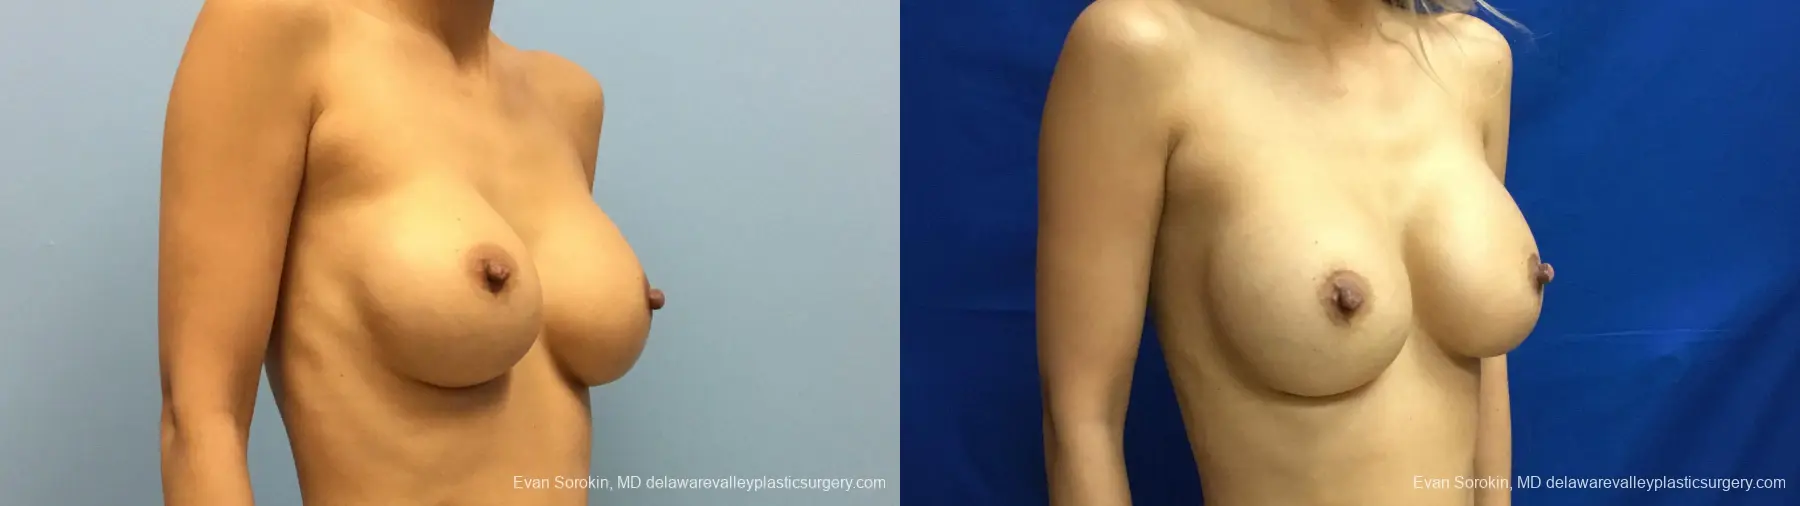 Philadelphia Breast Augmentation 13178 - Before and After 2